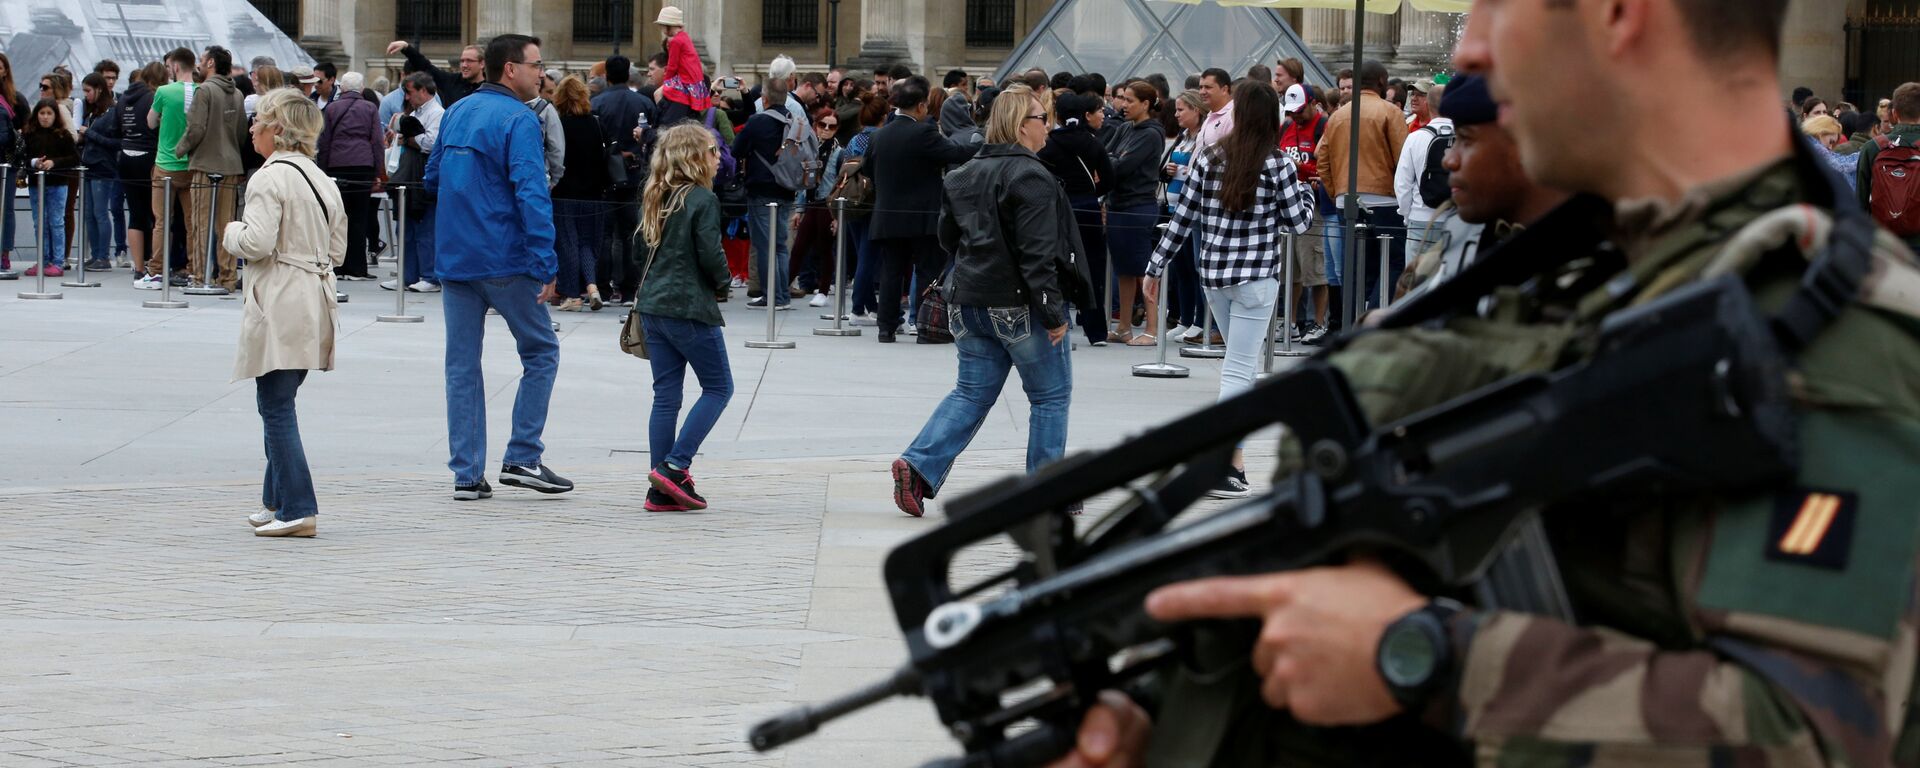 French army soldiers patrol as tourists form a queue at the entrance of the Louvre museum in Paris, France as the French capital is under high security during the UEFA 2016 European Championship - Sputnik International, 1920, 20.04.2019